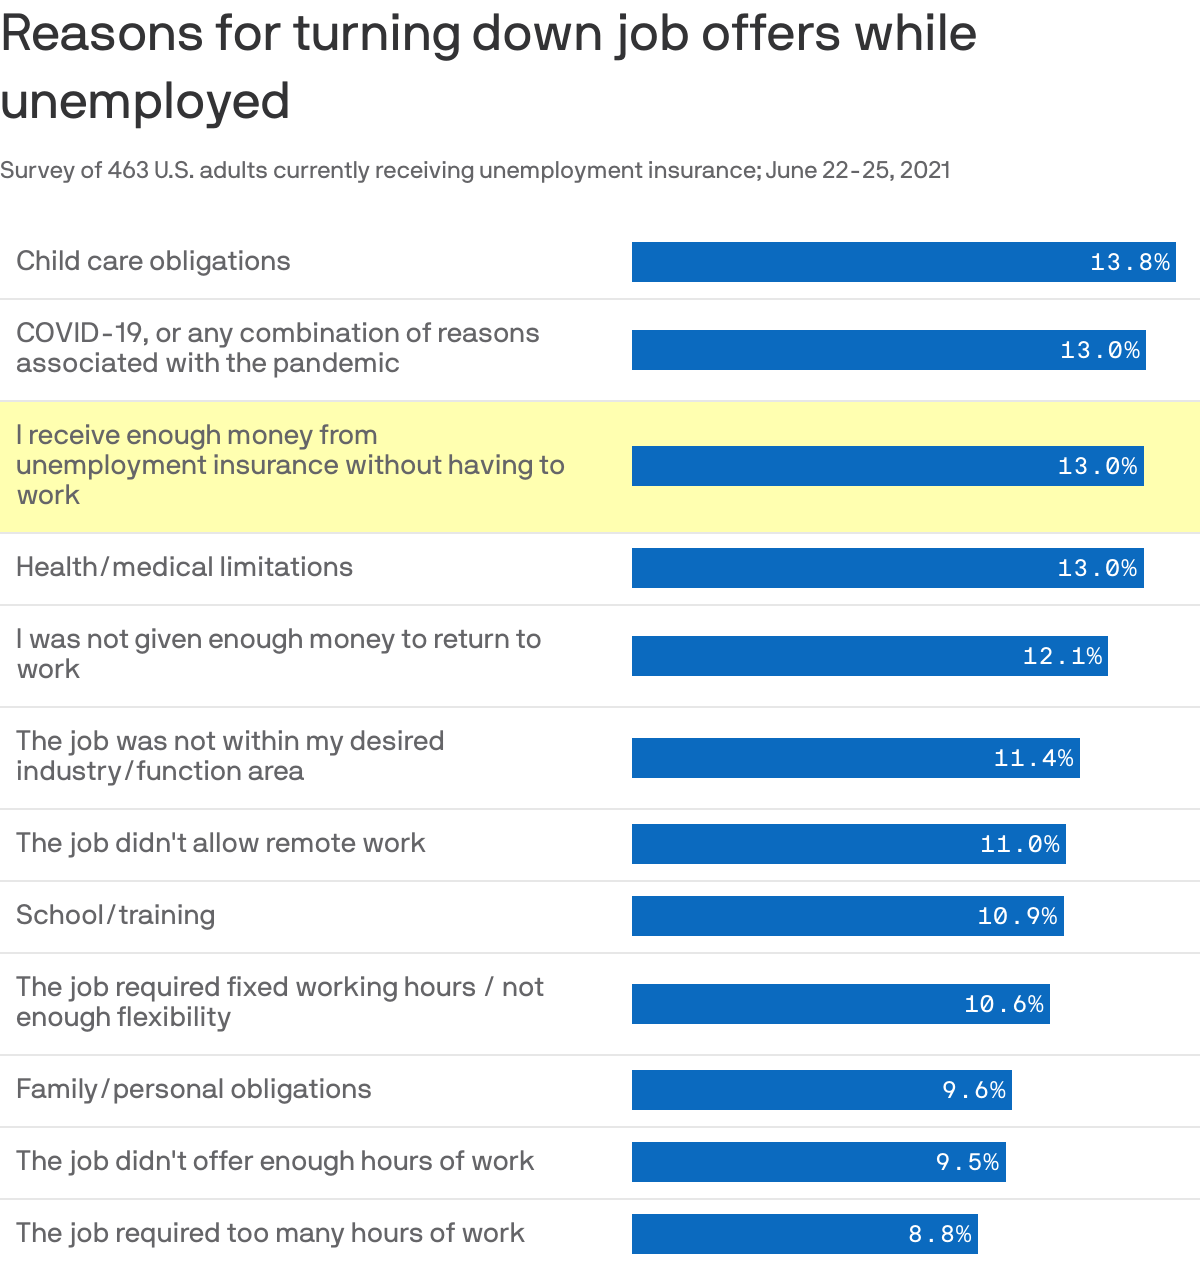 Reasons for turning down job offers while unemployed